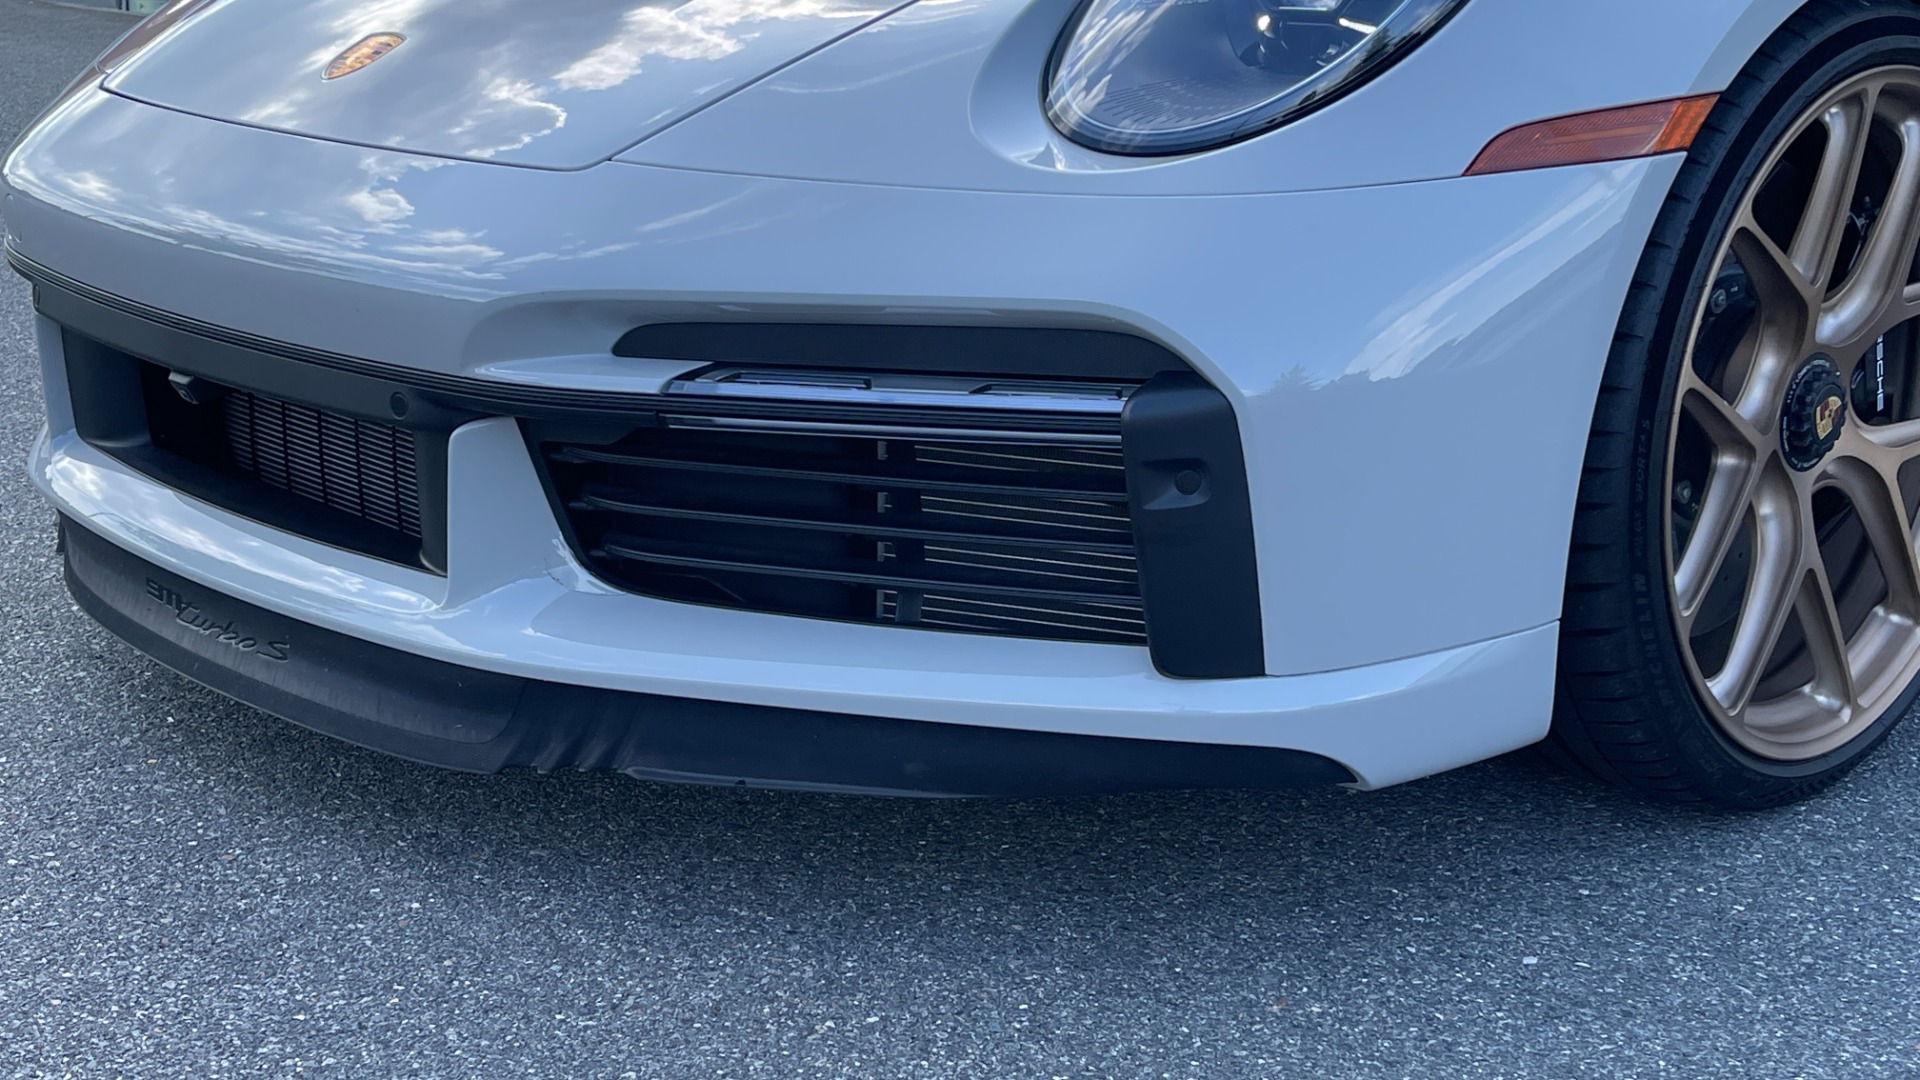 Used 2021 Porsche 911 Turbo S / HRE WHEELS / FRONT LIFT / MATRIX LIGHTS / PASM SUSPENSION for sale $299,000 at Formula Imports in Charlotte NC 28227 12